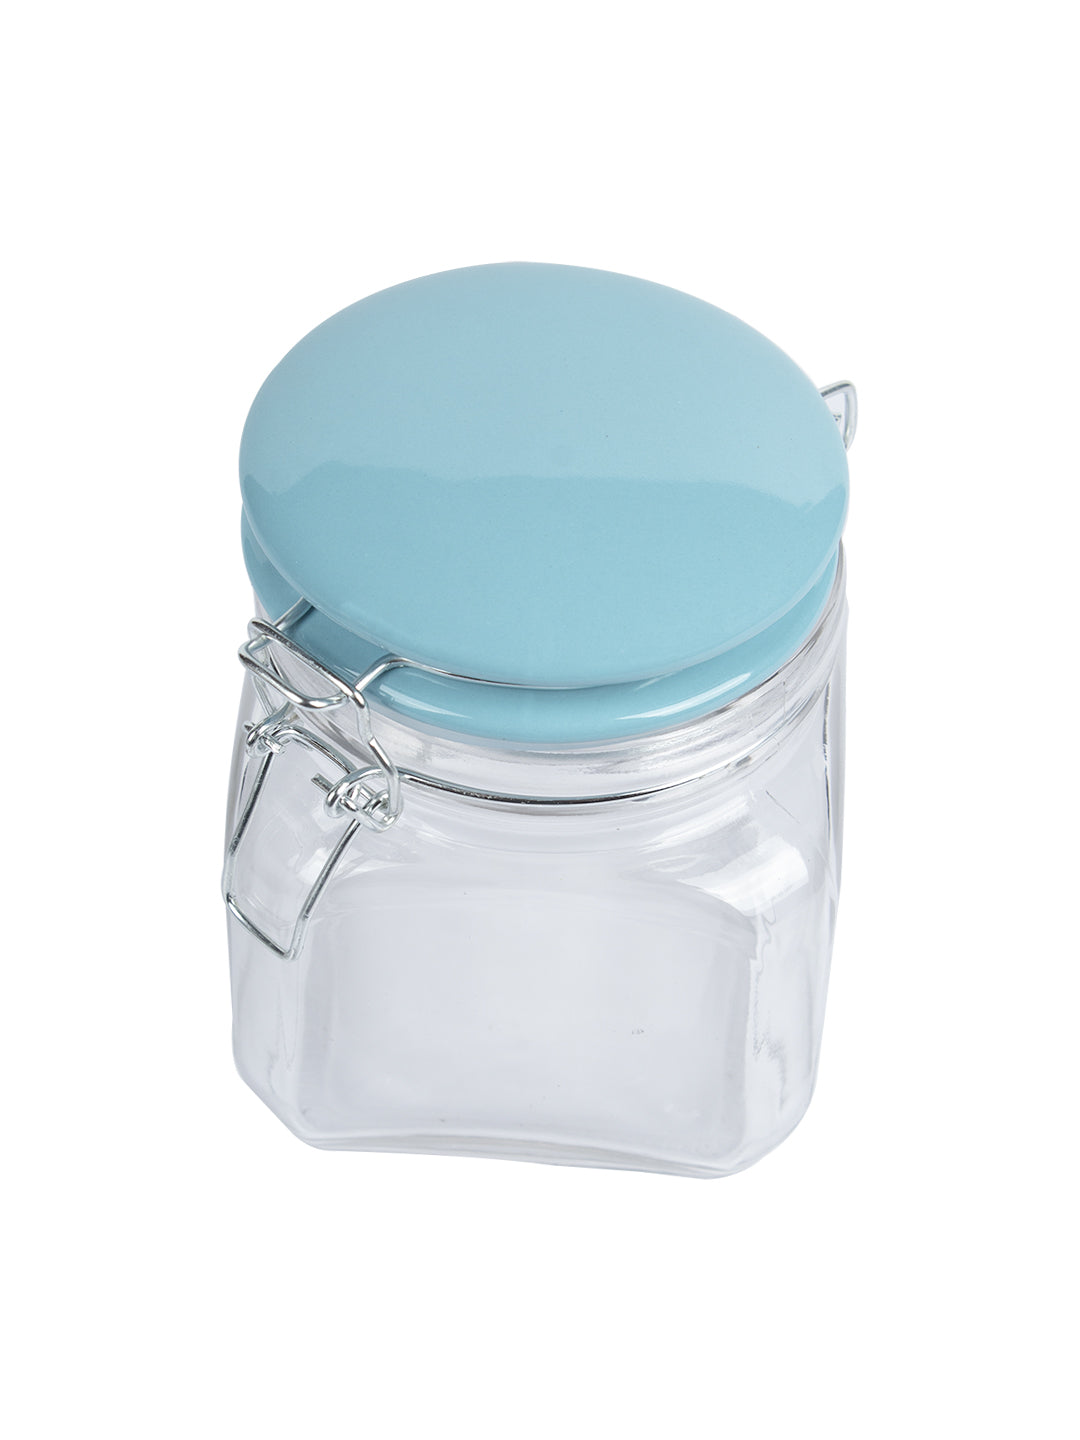 Glass Jar With Skyblue Ceramic Lid Pack Of 2 Pcs - (Each 700 Ml)